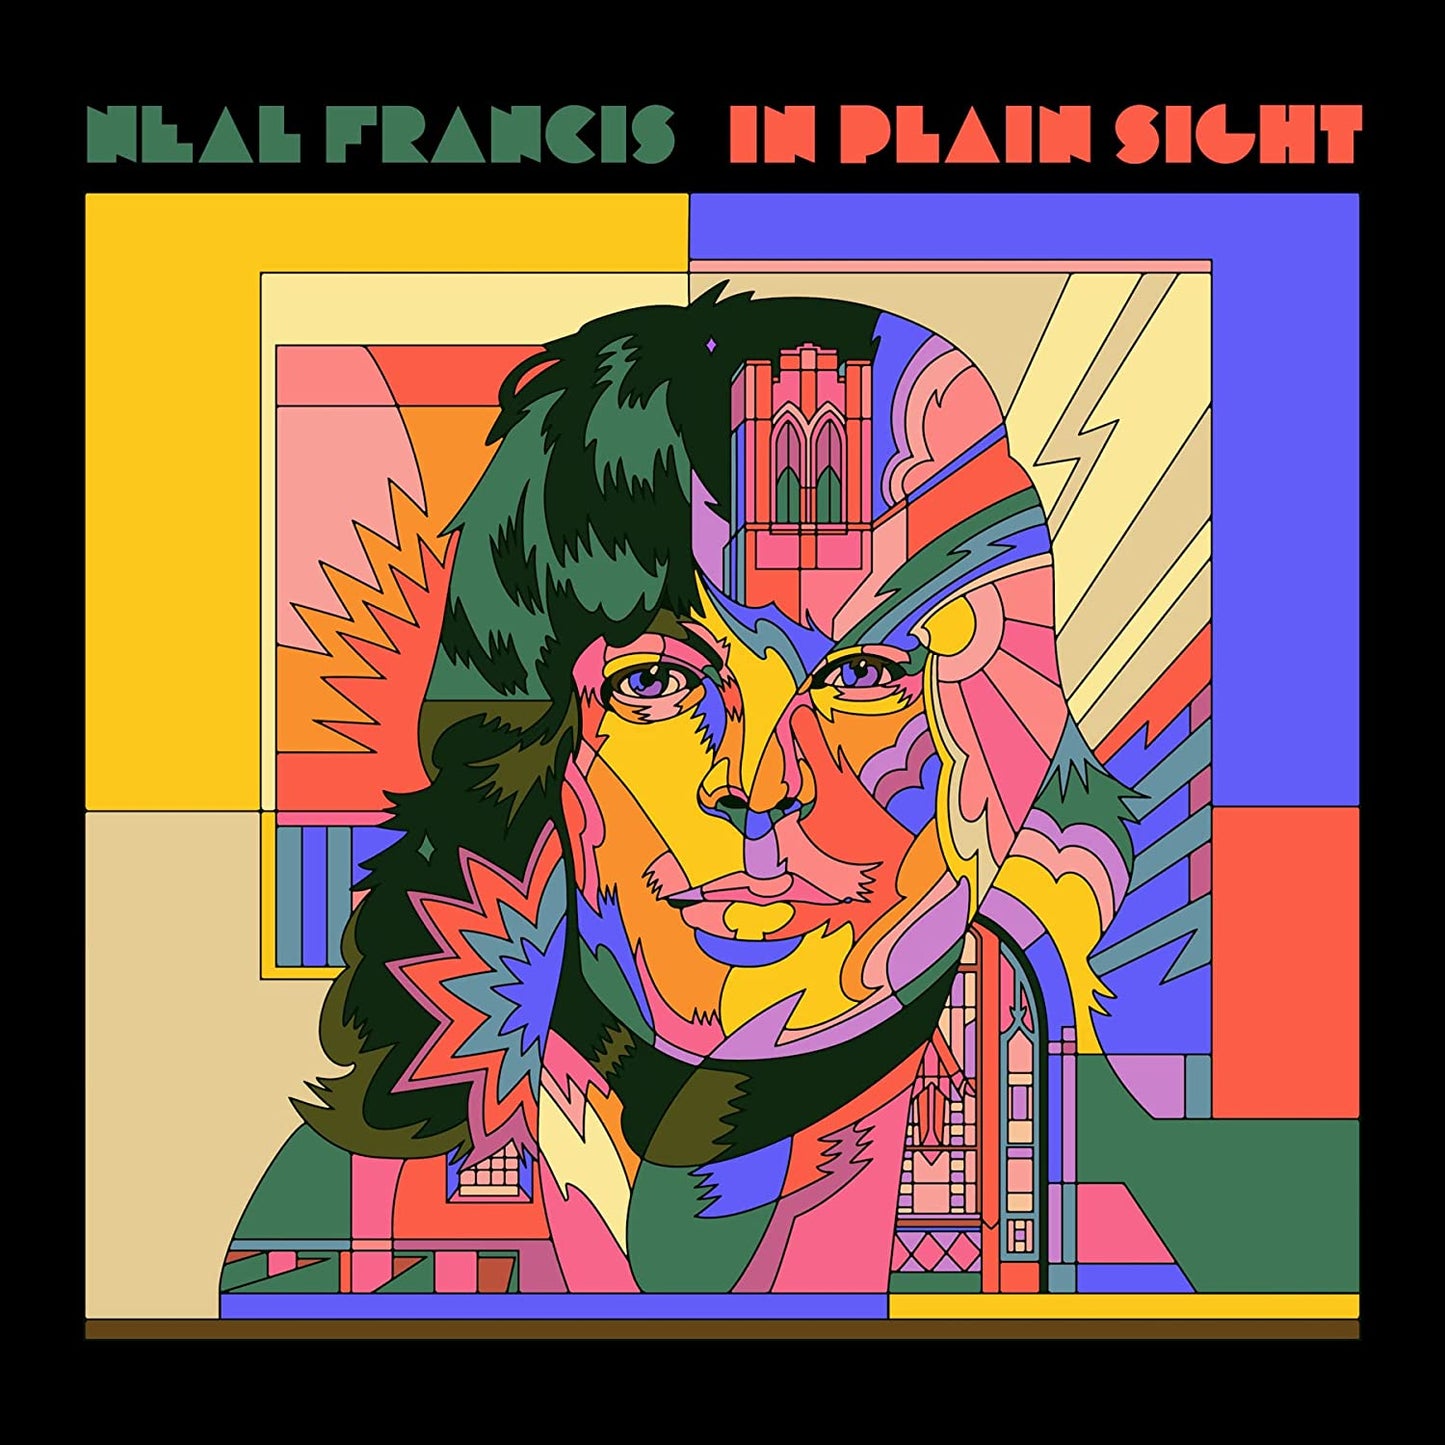 Neal Francis - In Plain Sight - LP